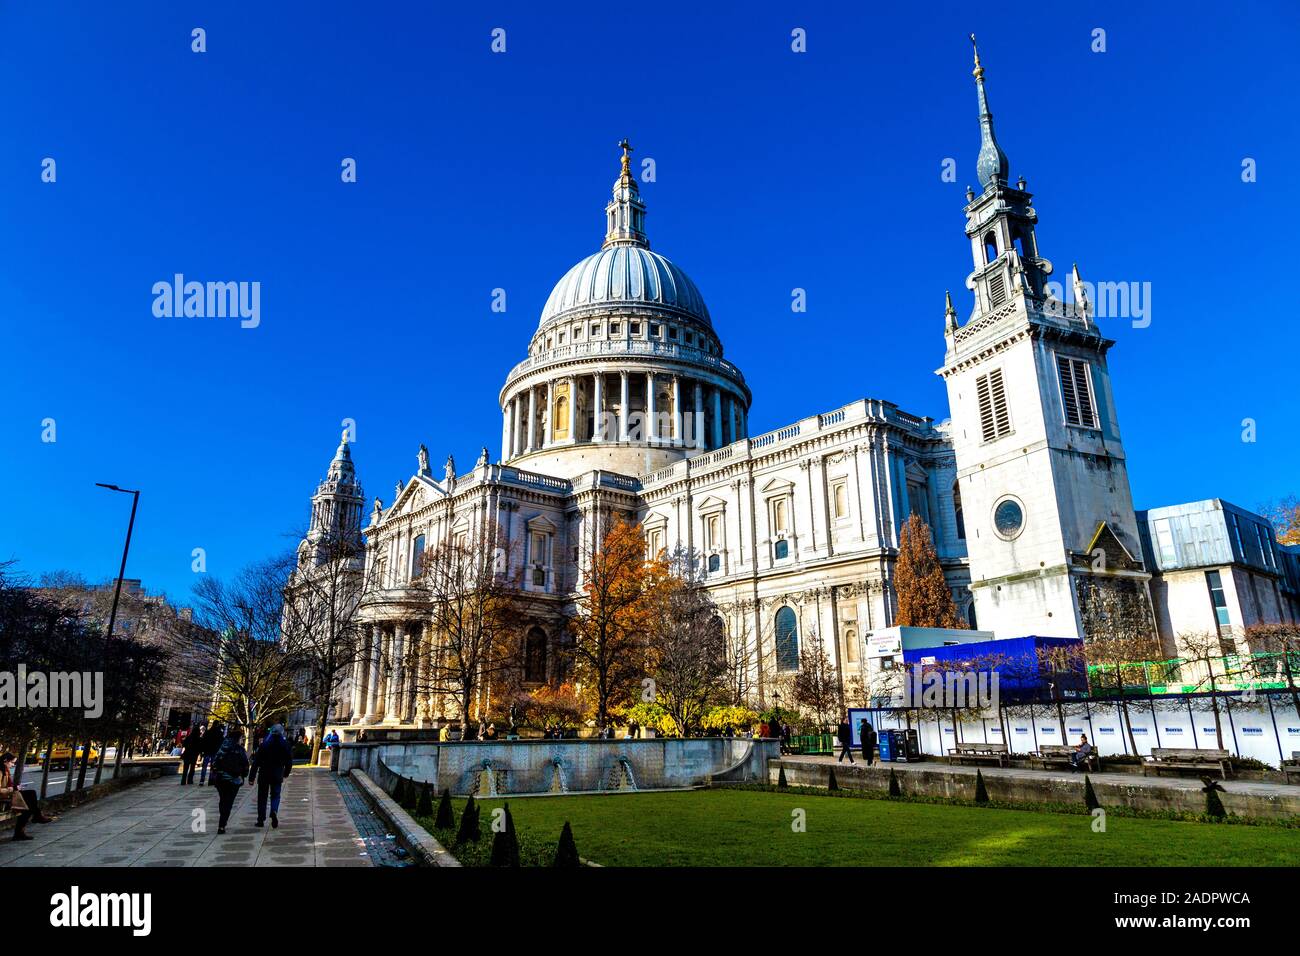 Exterior of St Pauls cathedral, London, UK Stock Photo